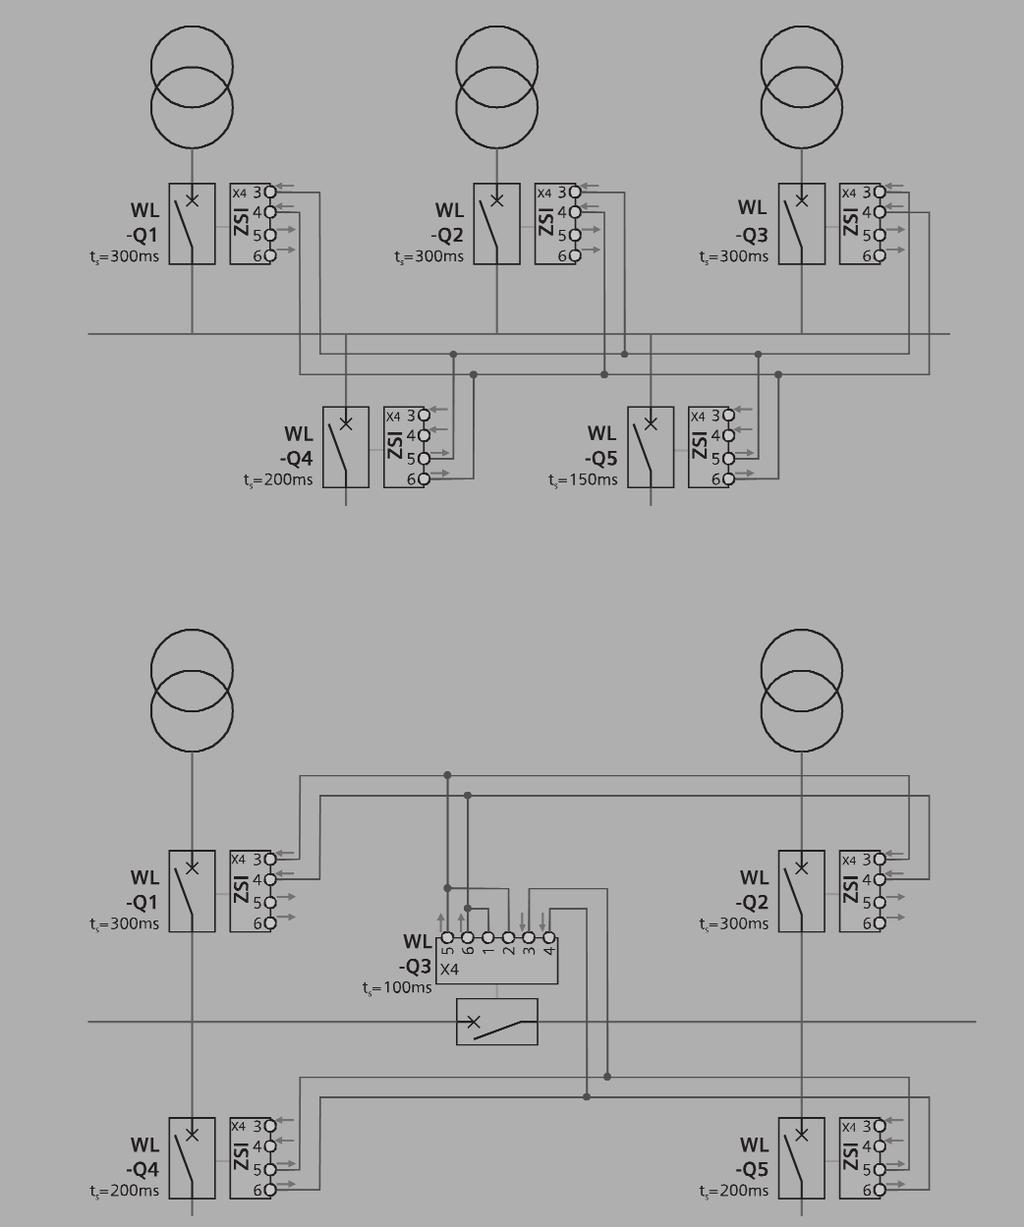 Communication-capable Circuit Breakers WL Circuit Breaker Graphic 2-7 This diagram consists of two parts: